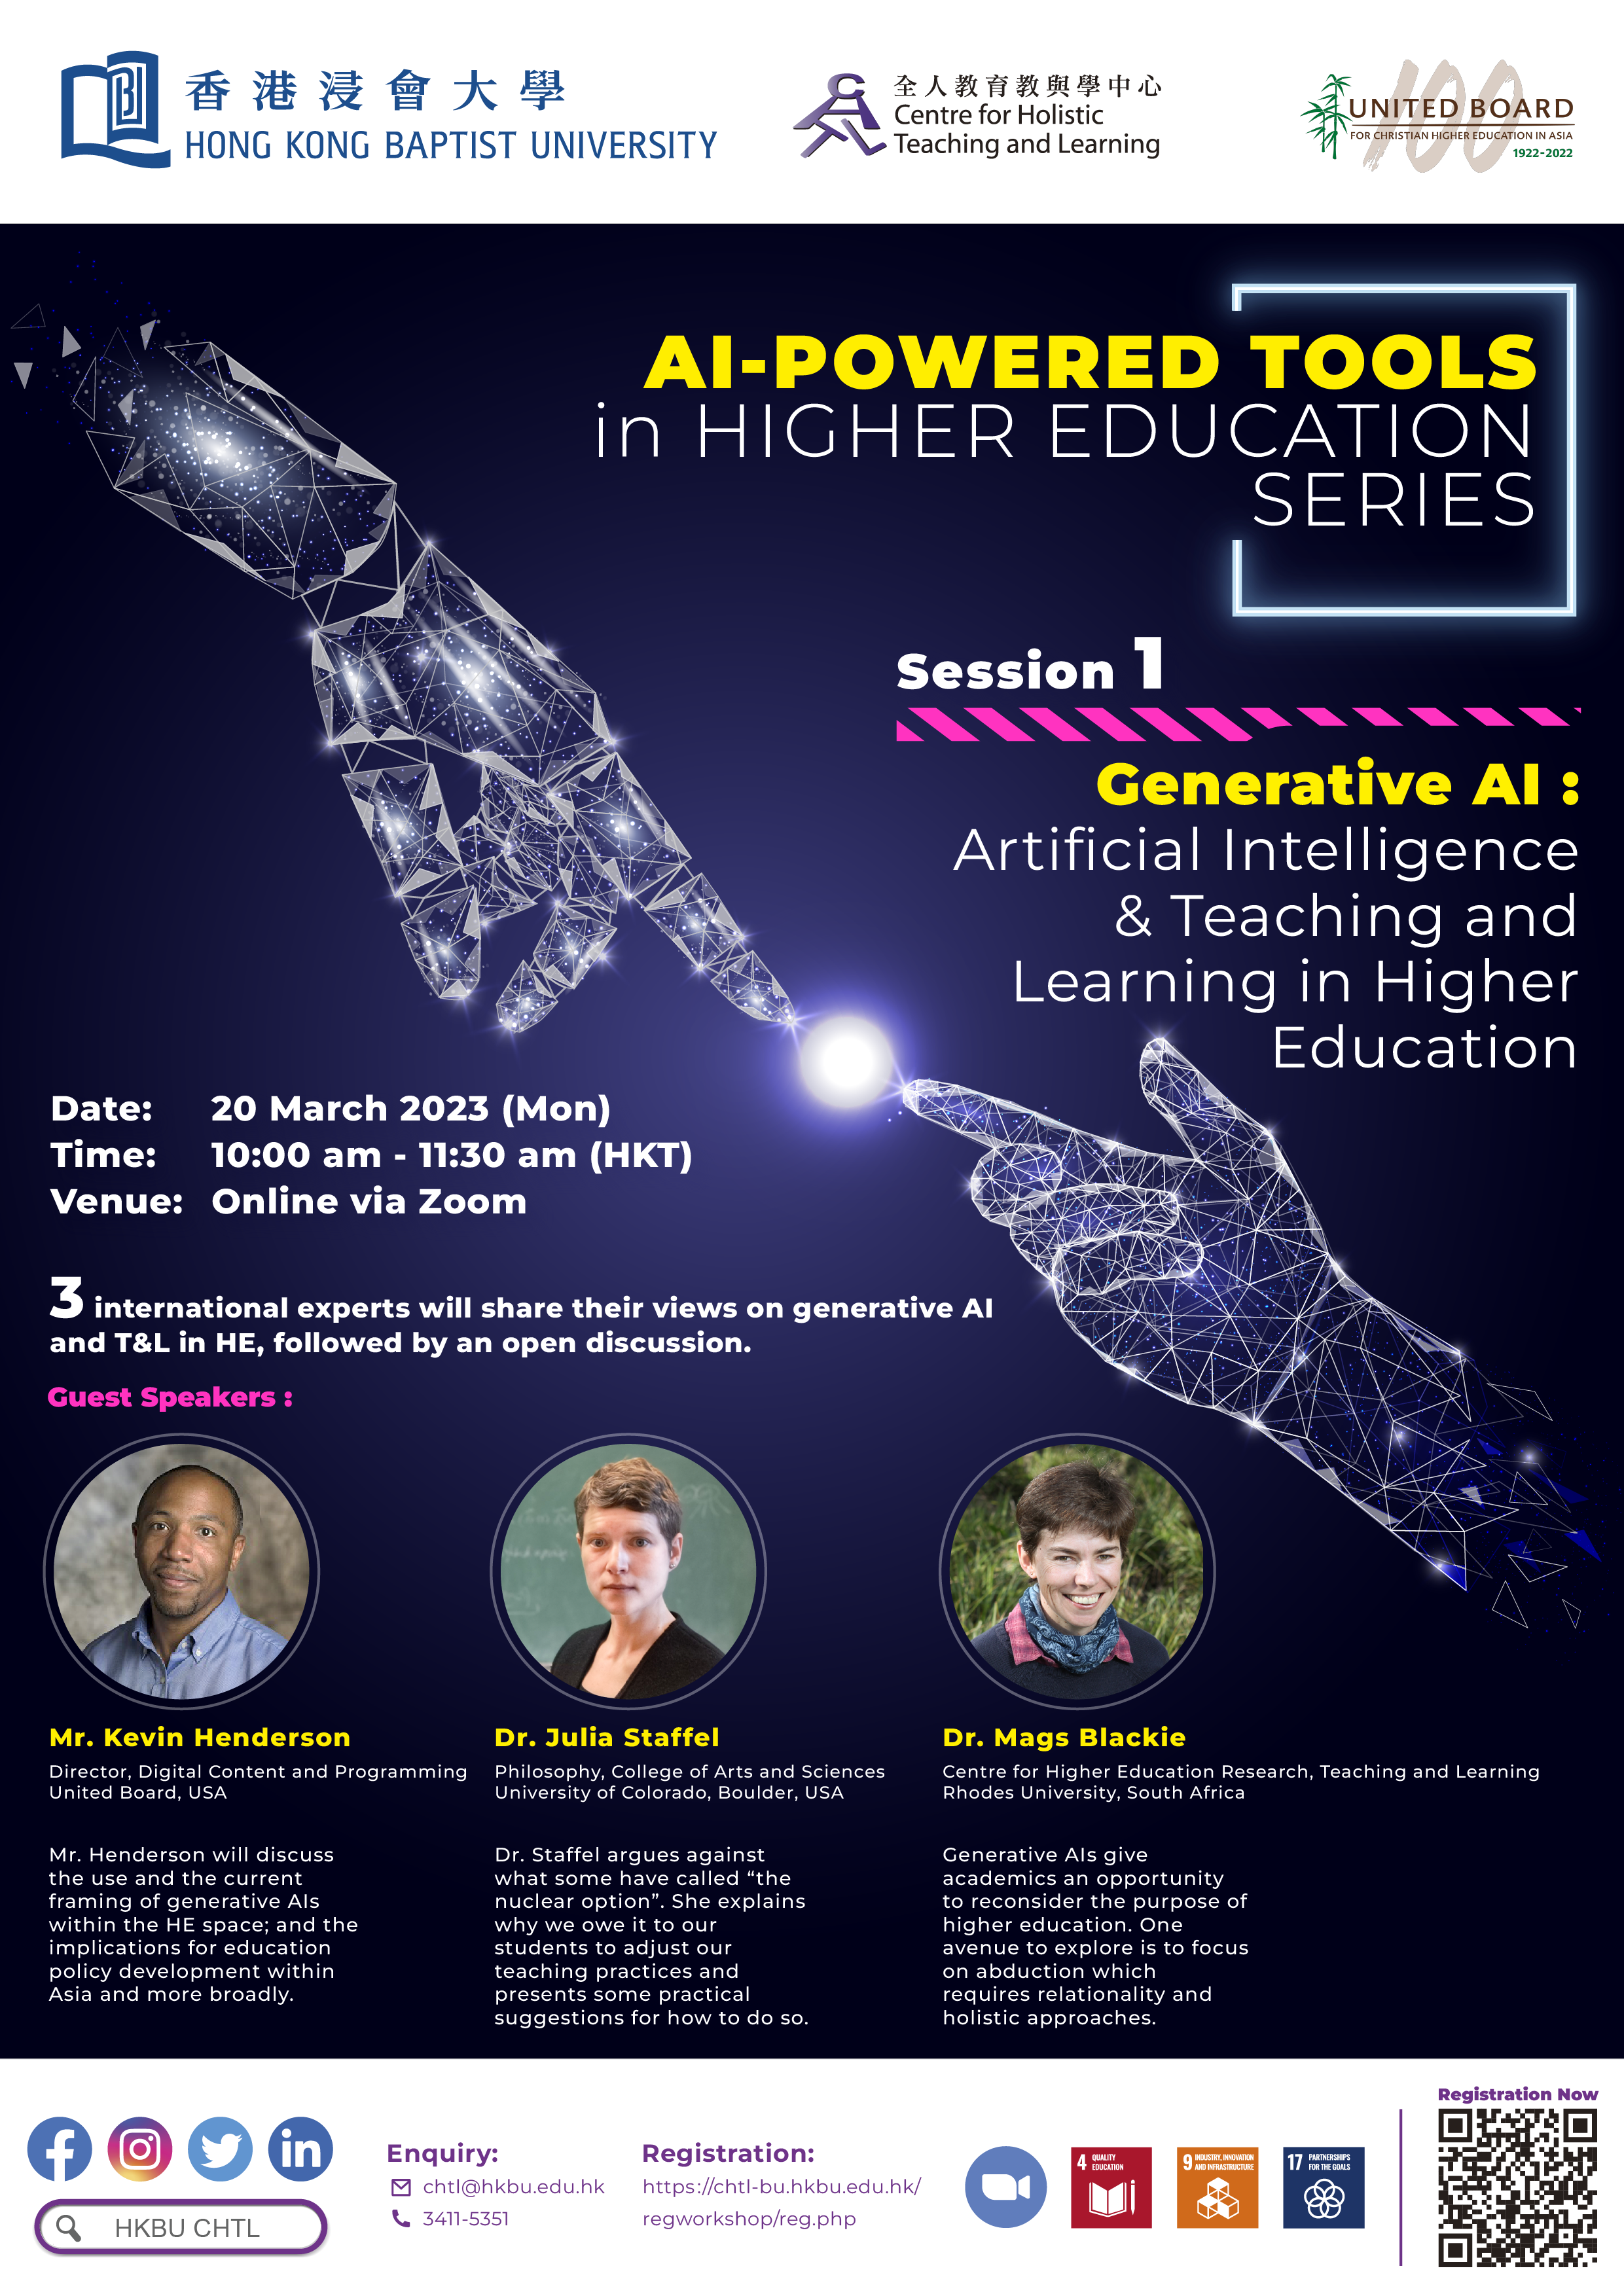 Generative AI: Artificial Intelligence & Teaching and Learning in Higher Education